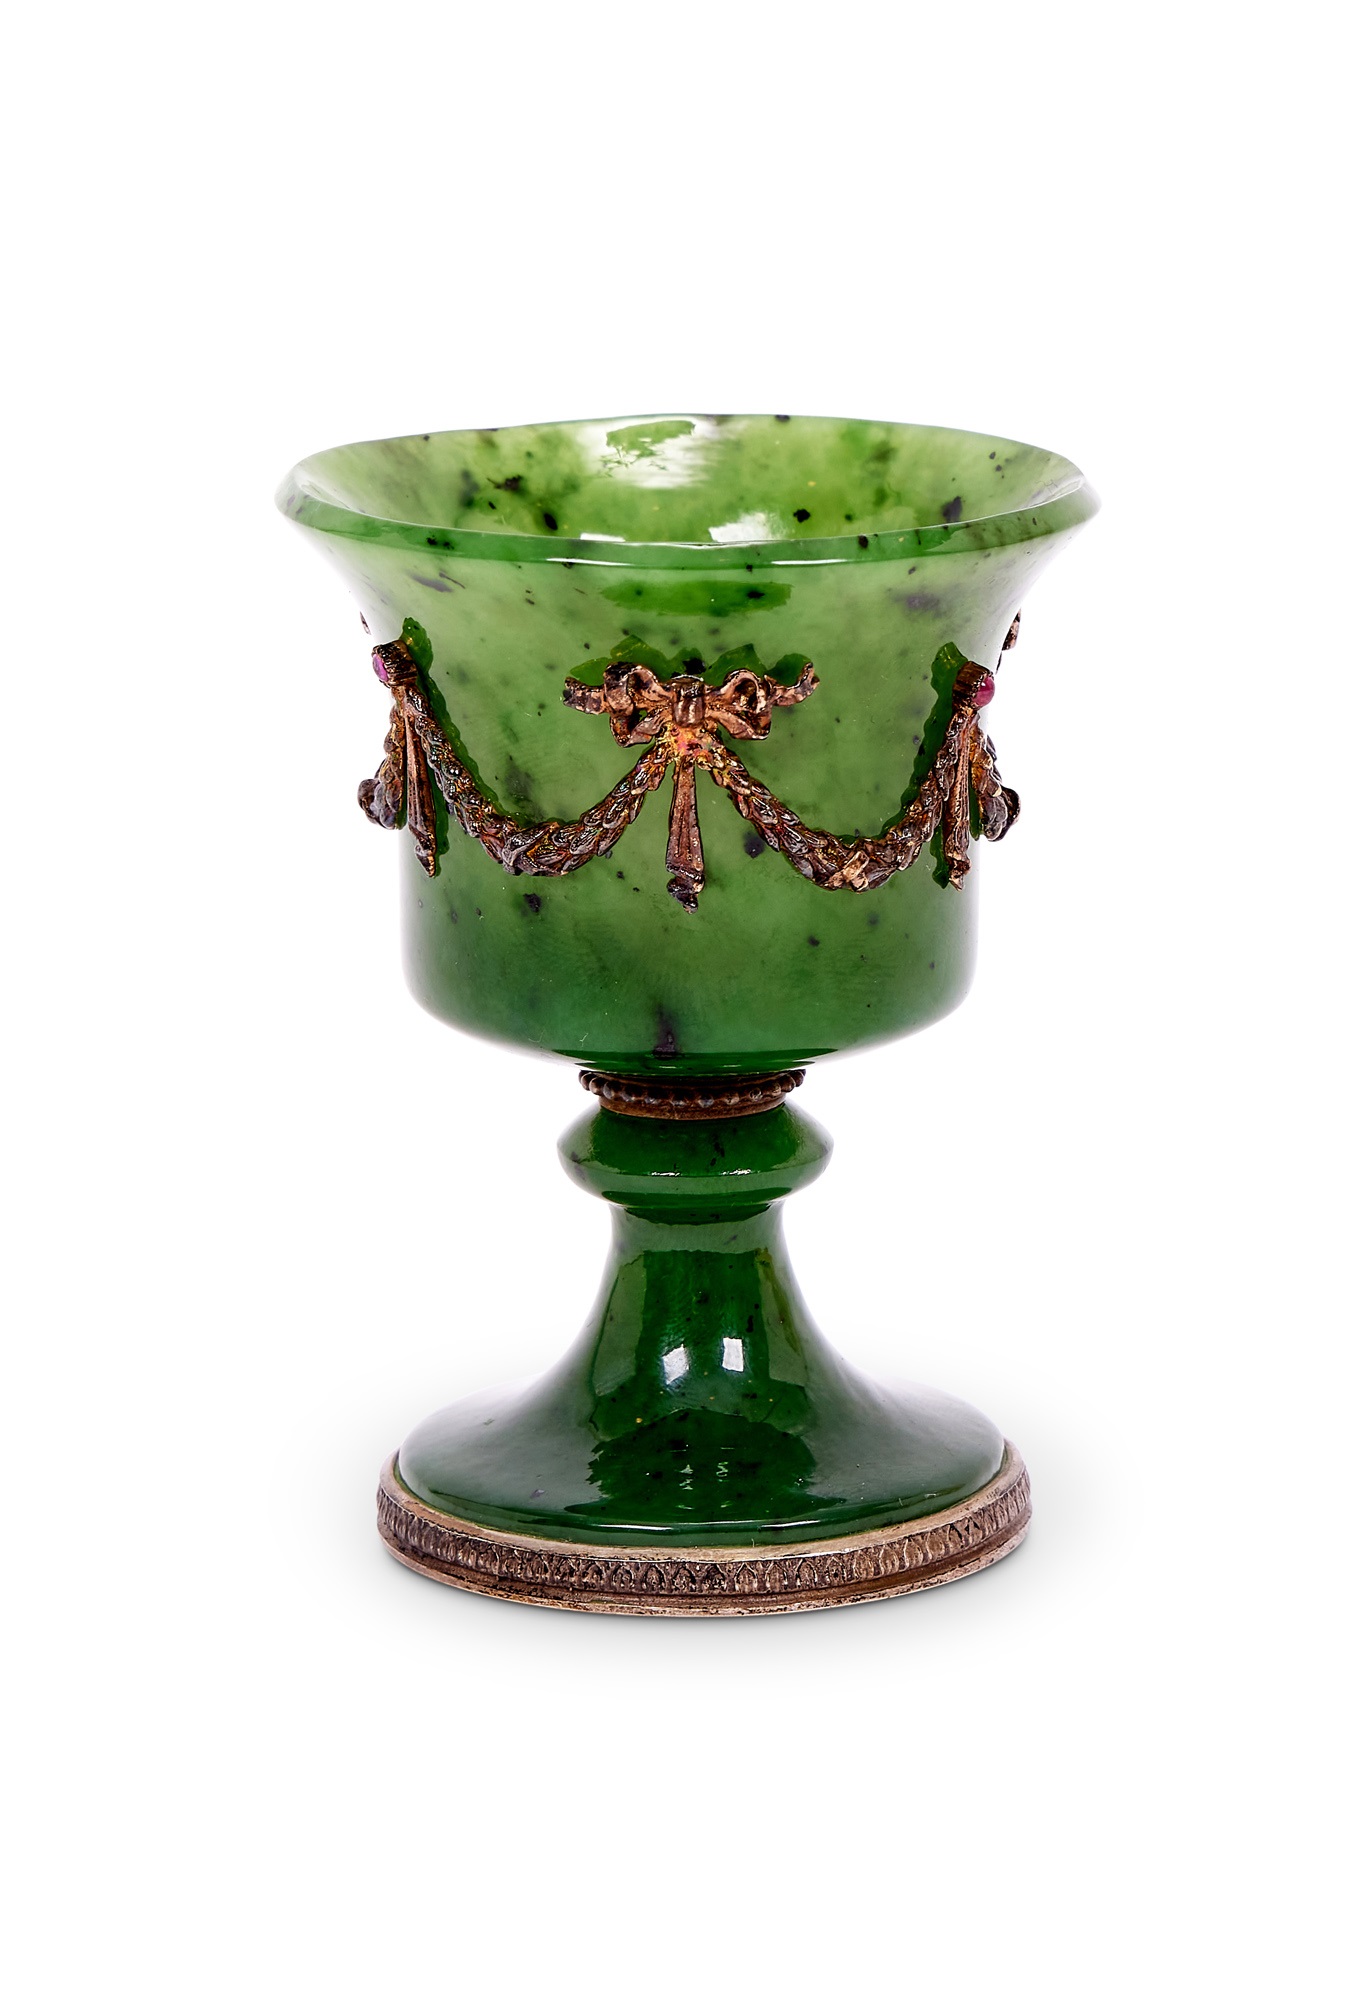 A FABERGE STYLE NEPHRITE AND SILVER MOUNTED MINIATURE CUP